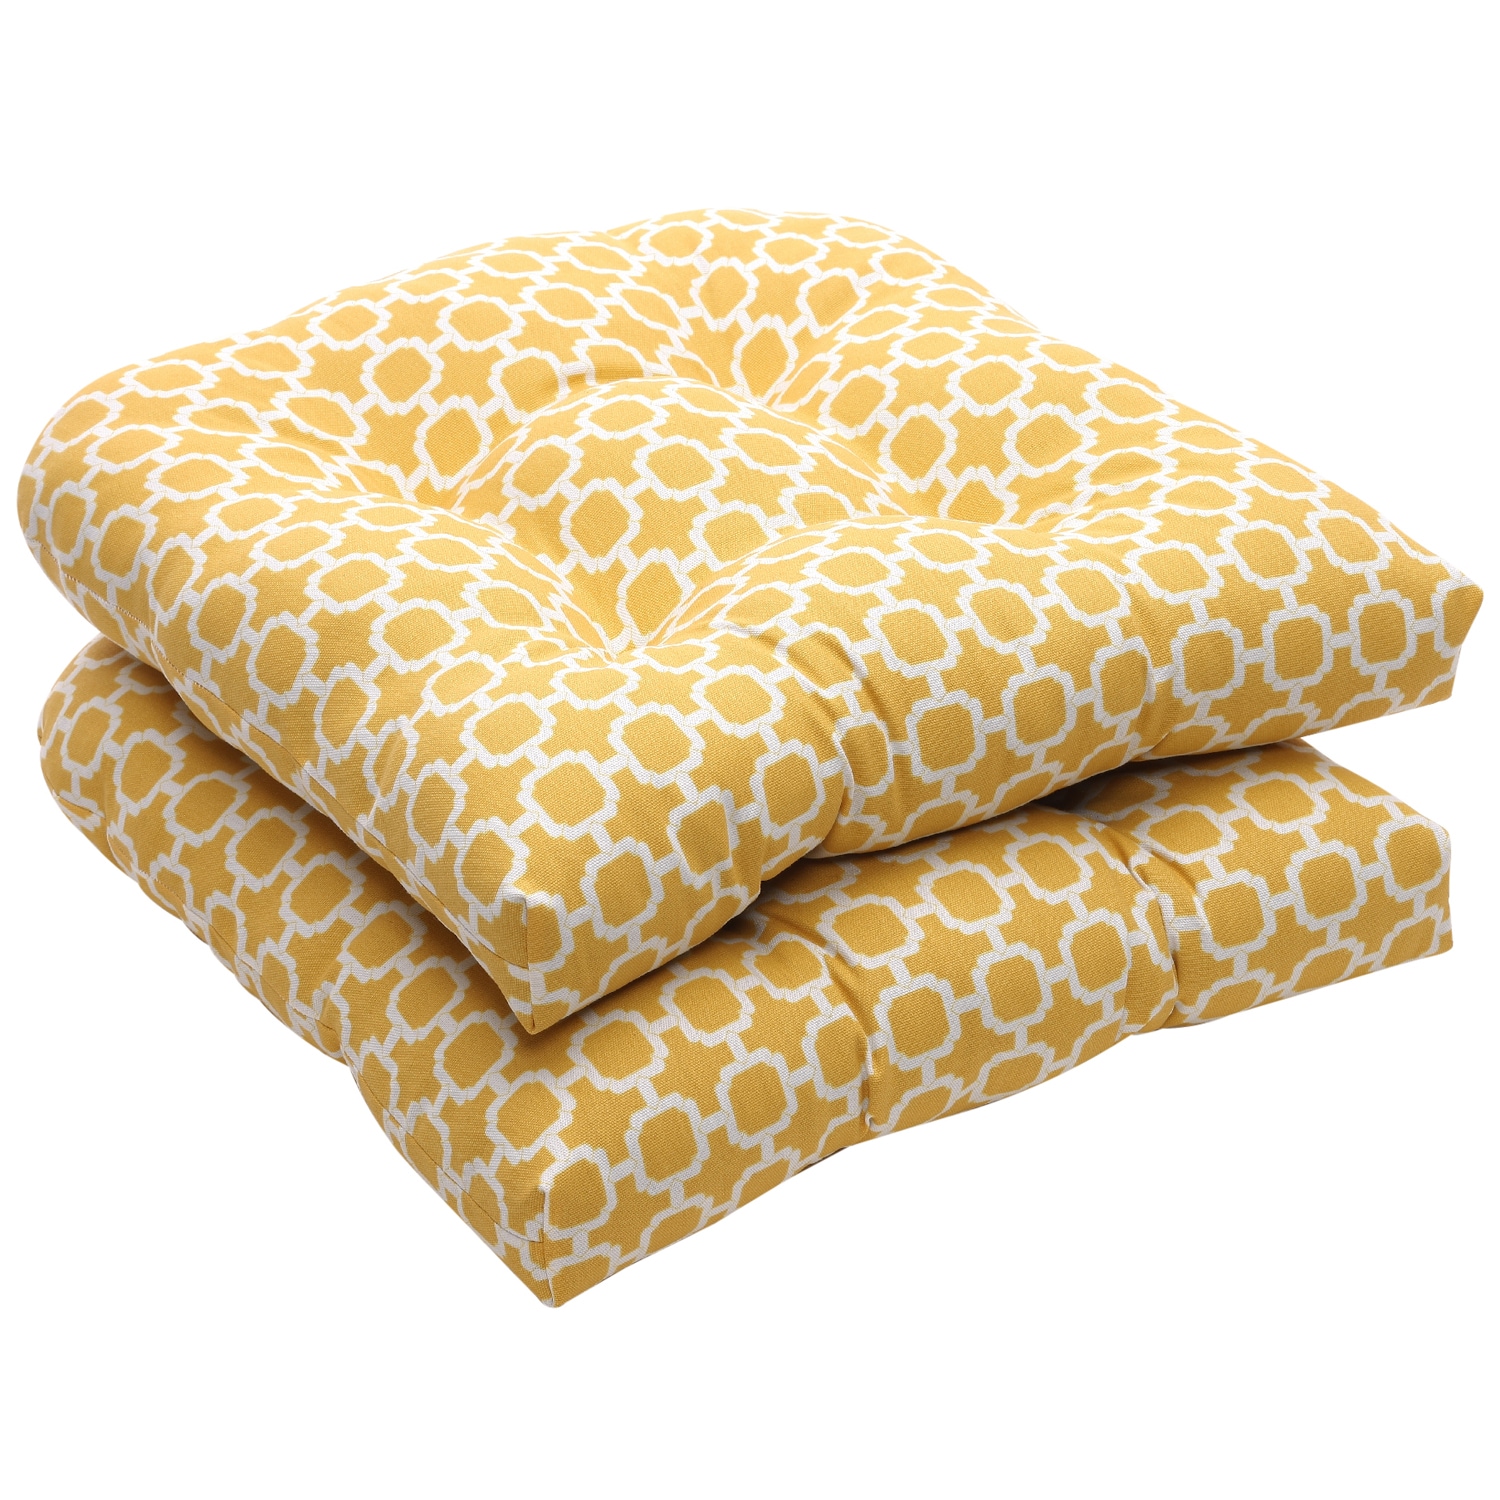 Outdoor Yellow and White Geometric Wicker Seat Cushions Set of 2 L14095779